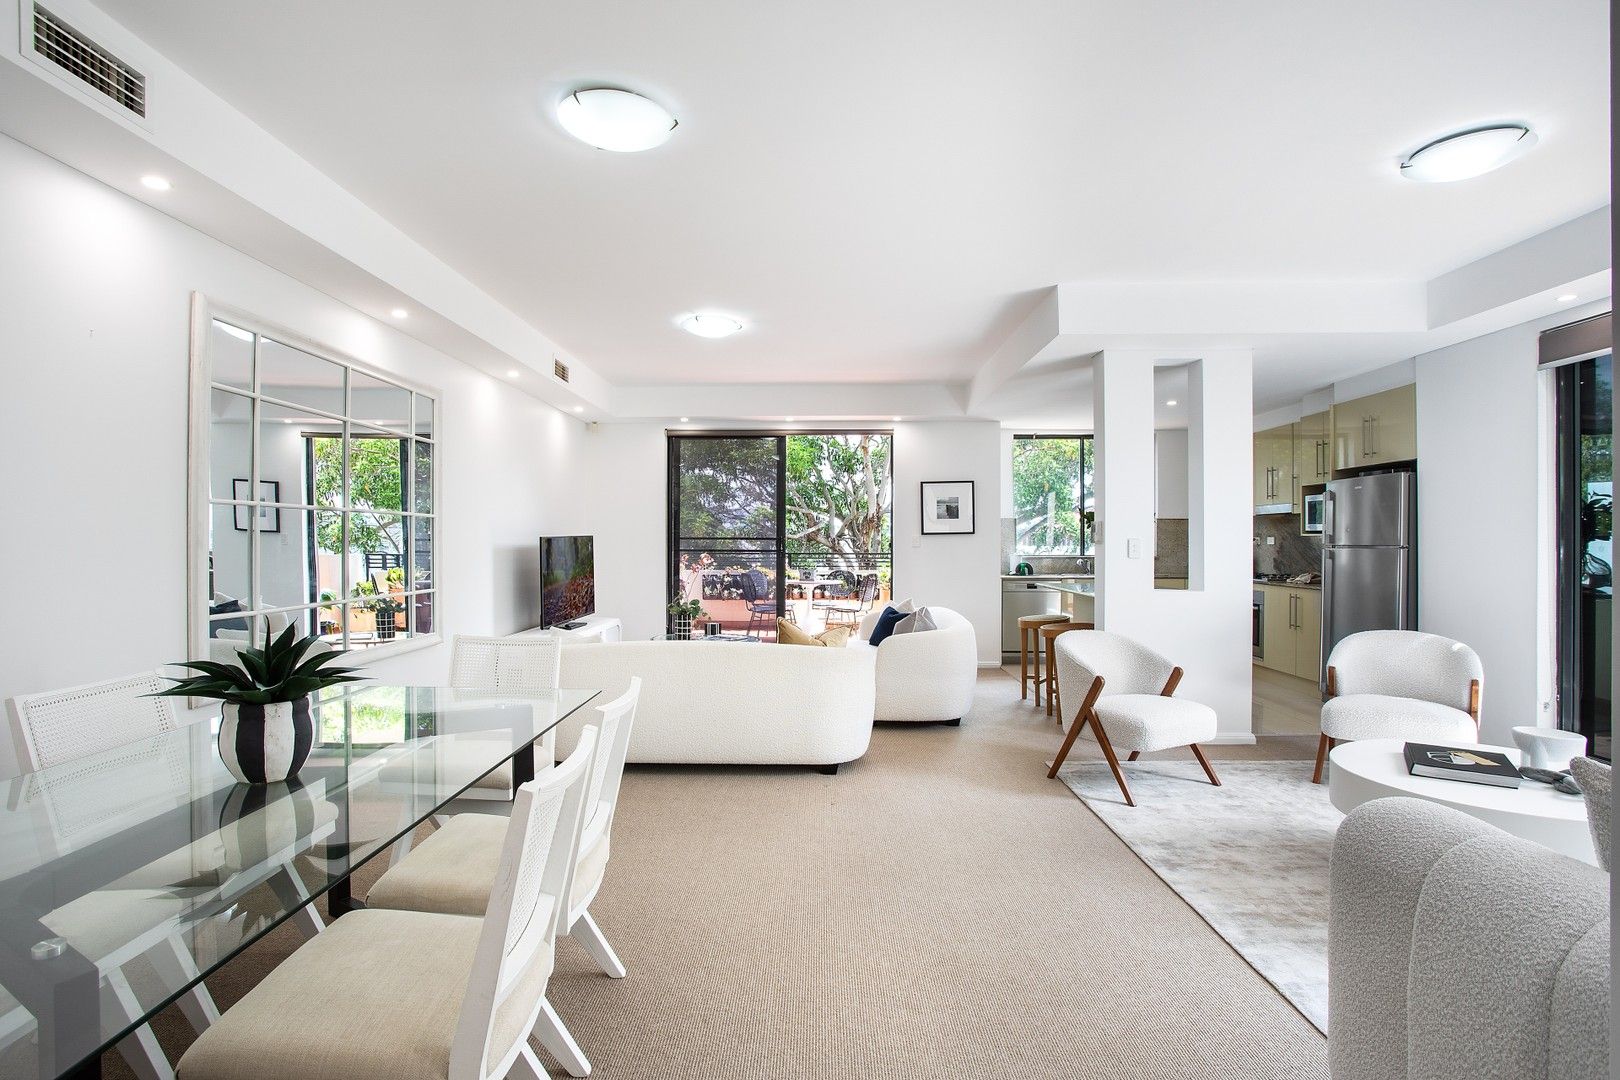 3 bedrooms Apartment / Unit / Flat in Apartment 7 'Tuscany' 18-20 Hamilton Street ROSE BAY NSW, 2029